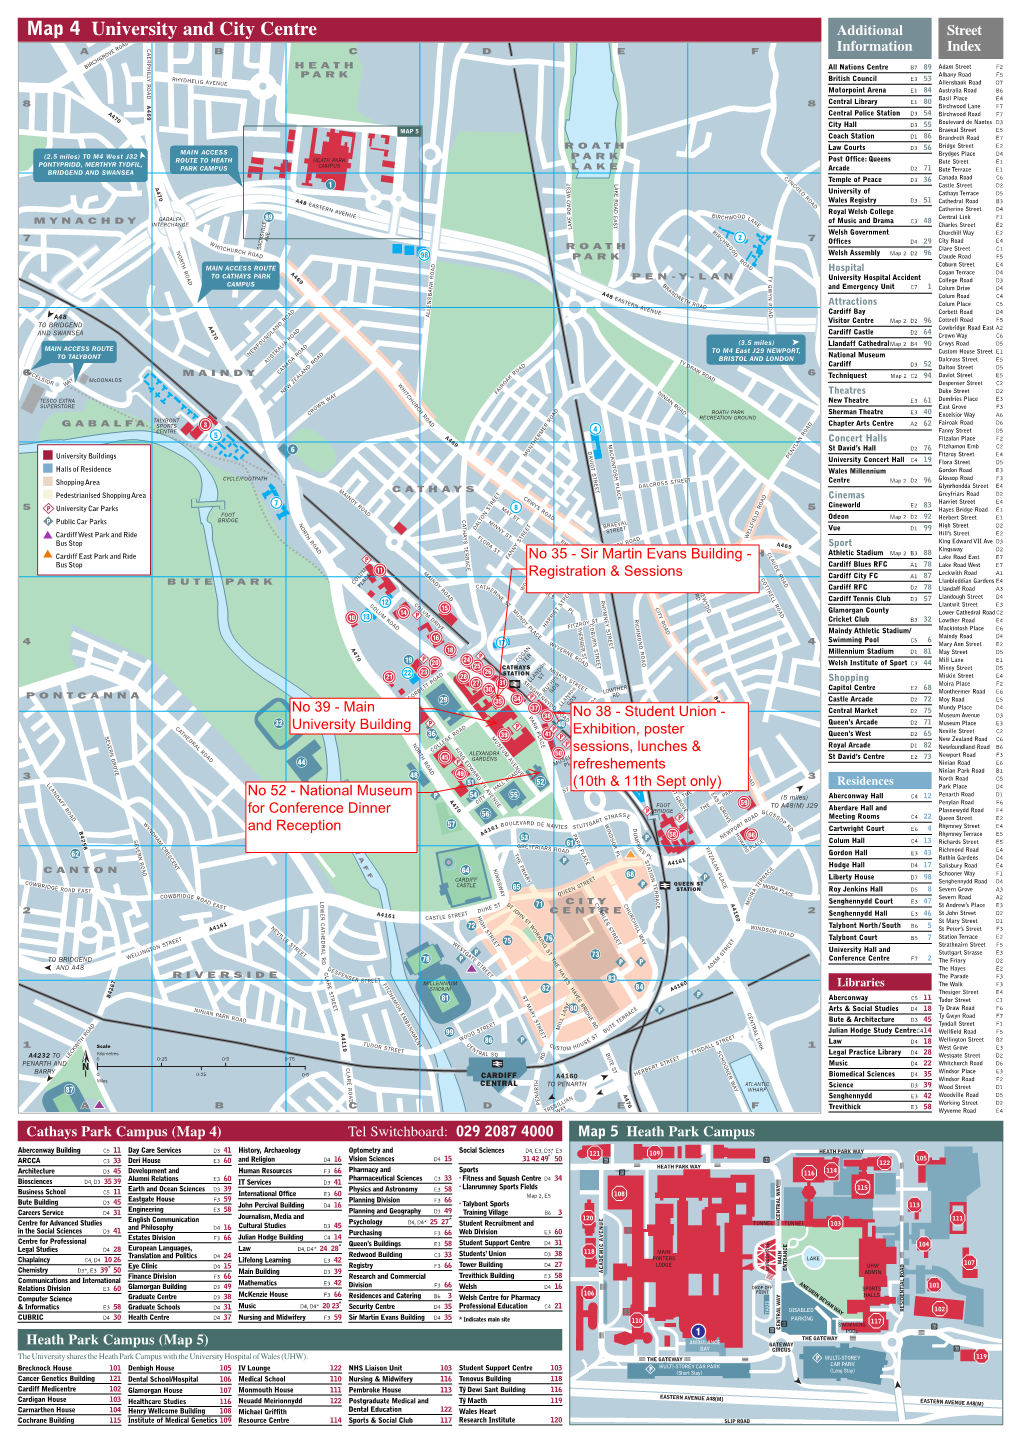 Map 4 University and City Centre